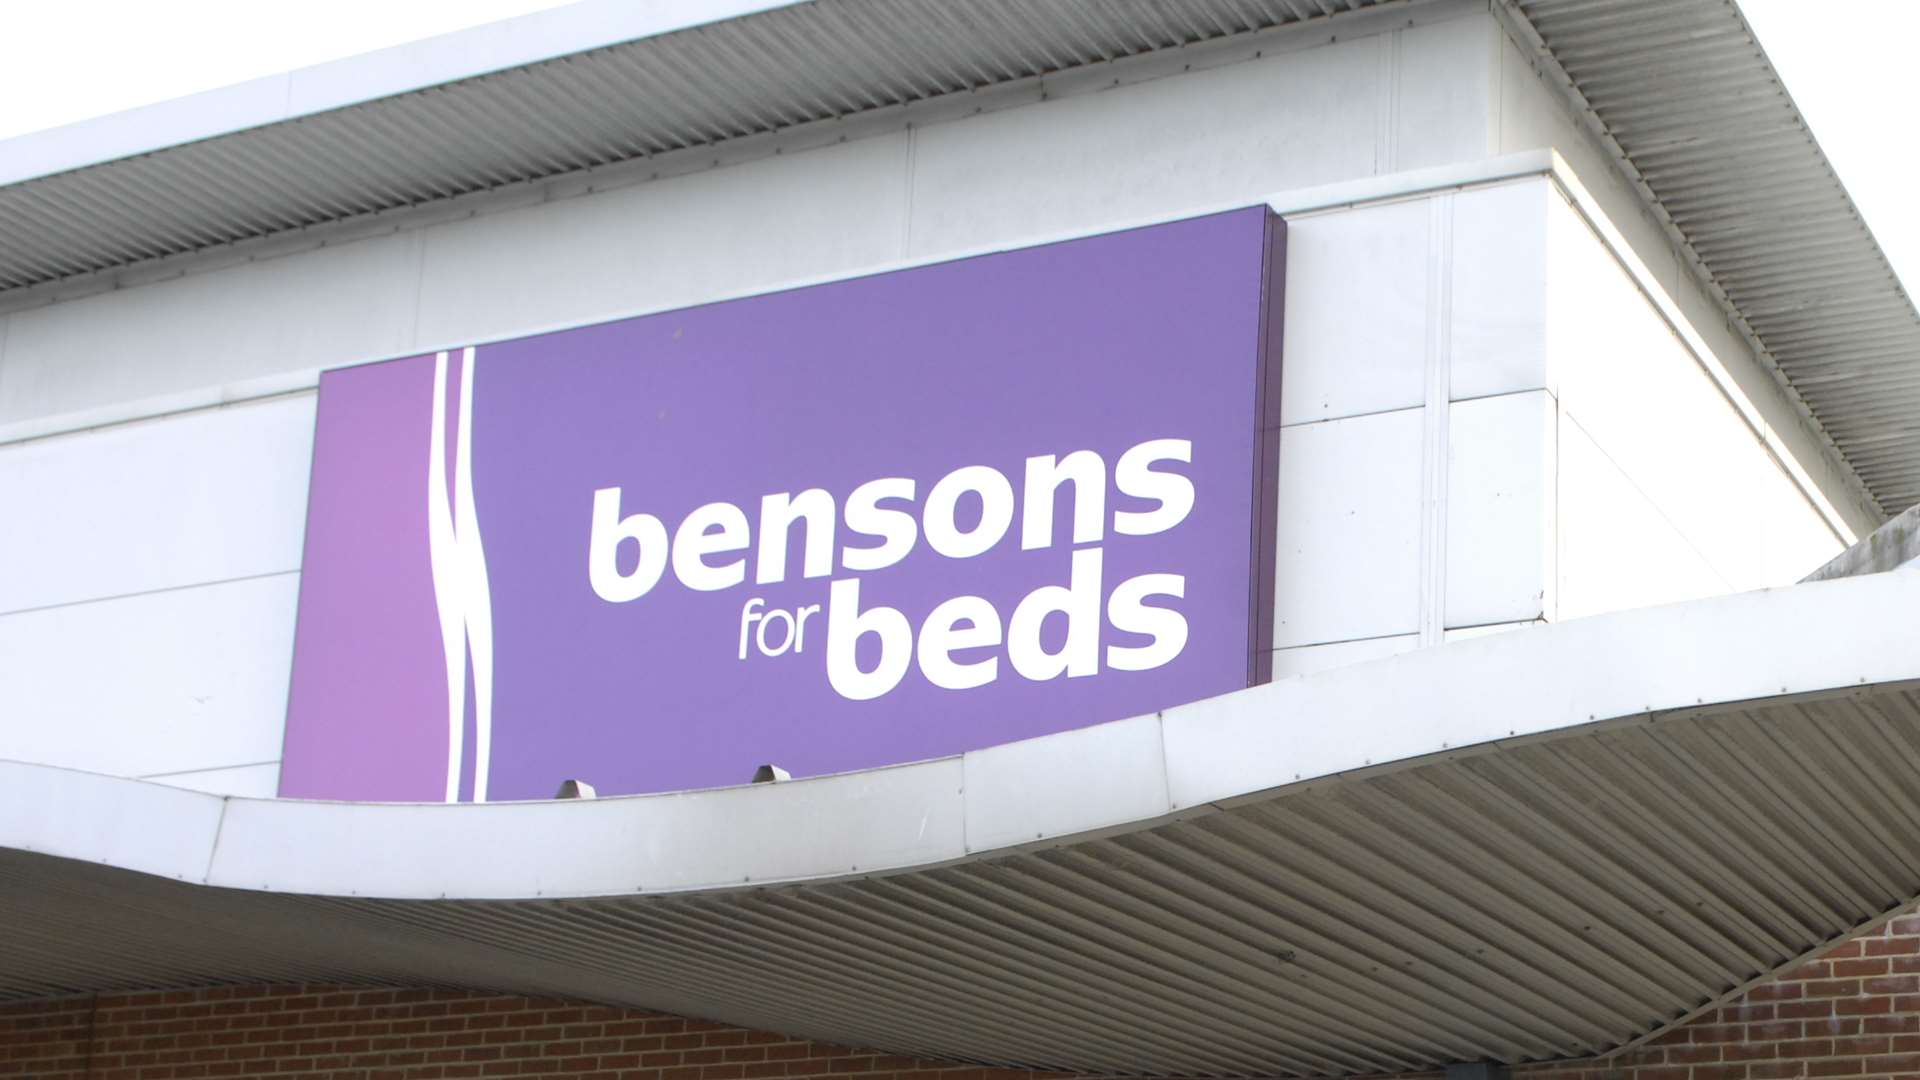 Bensons Beds is coming to Whitfield